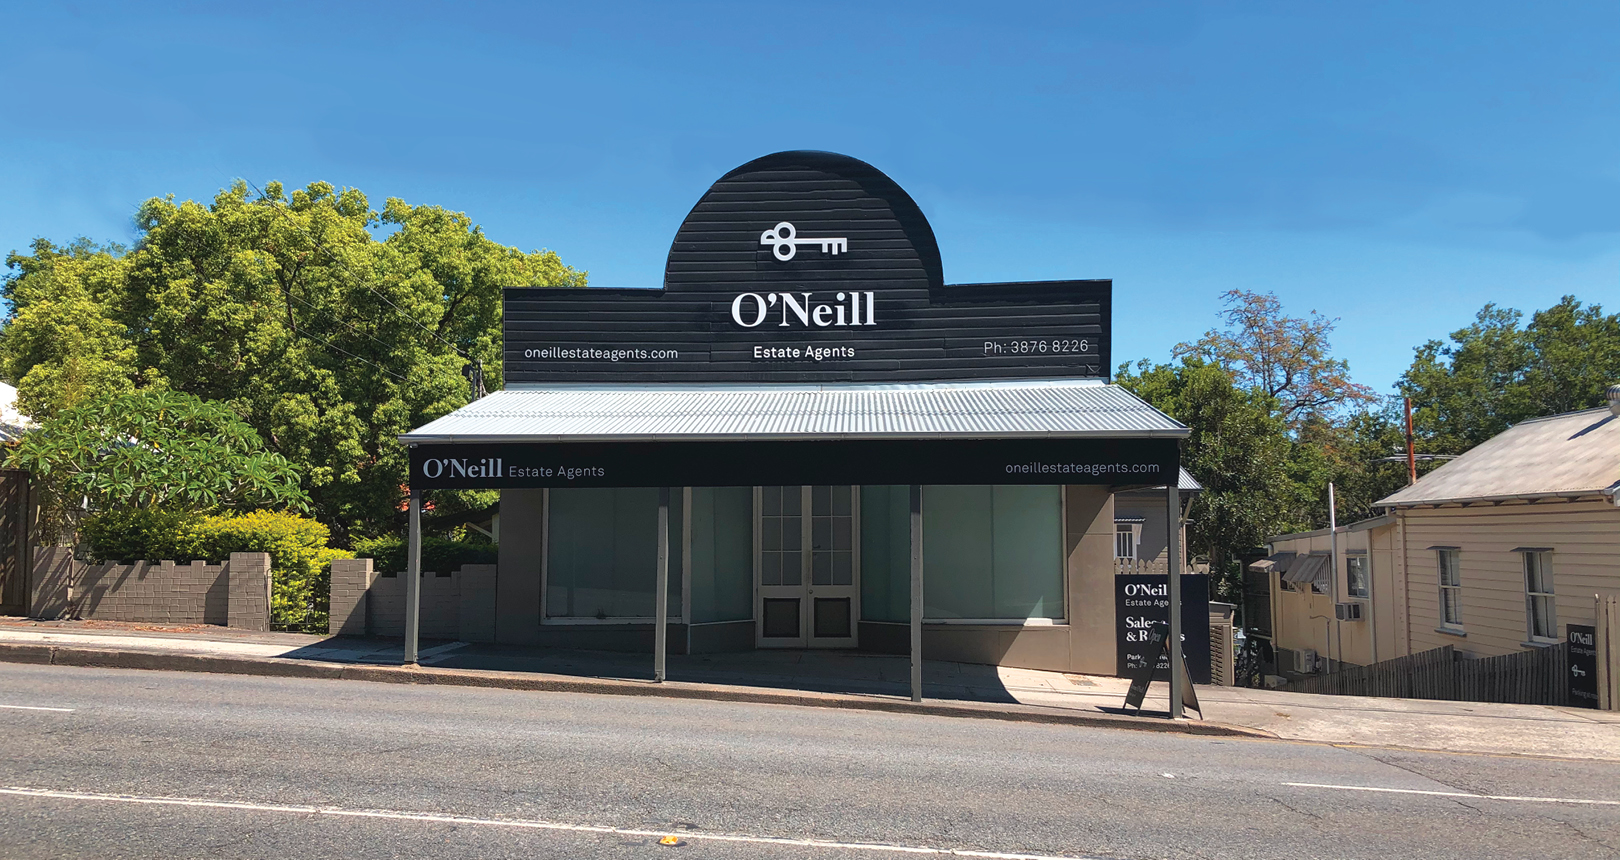 An exciting new chapter for O’Neill Estate Agents